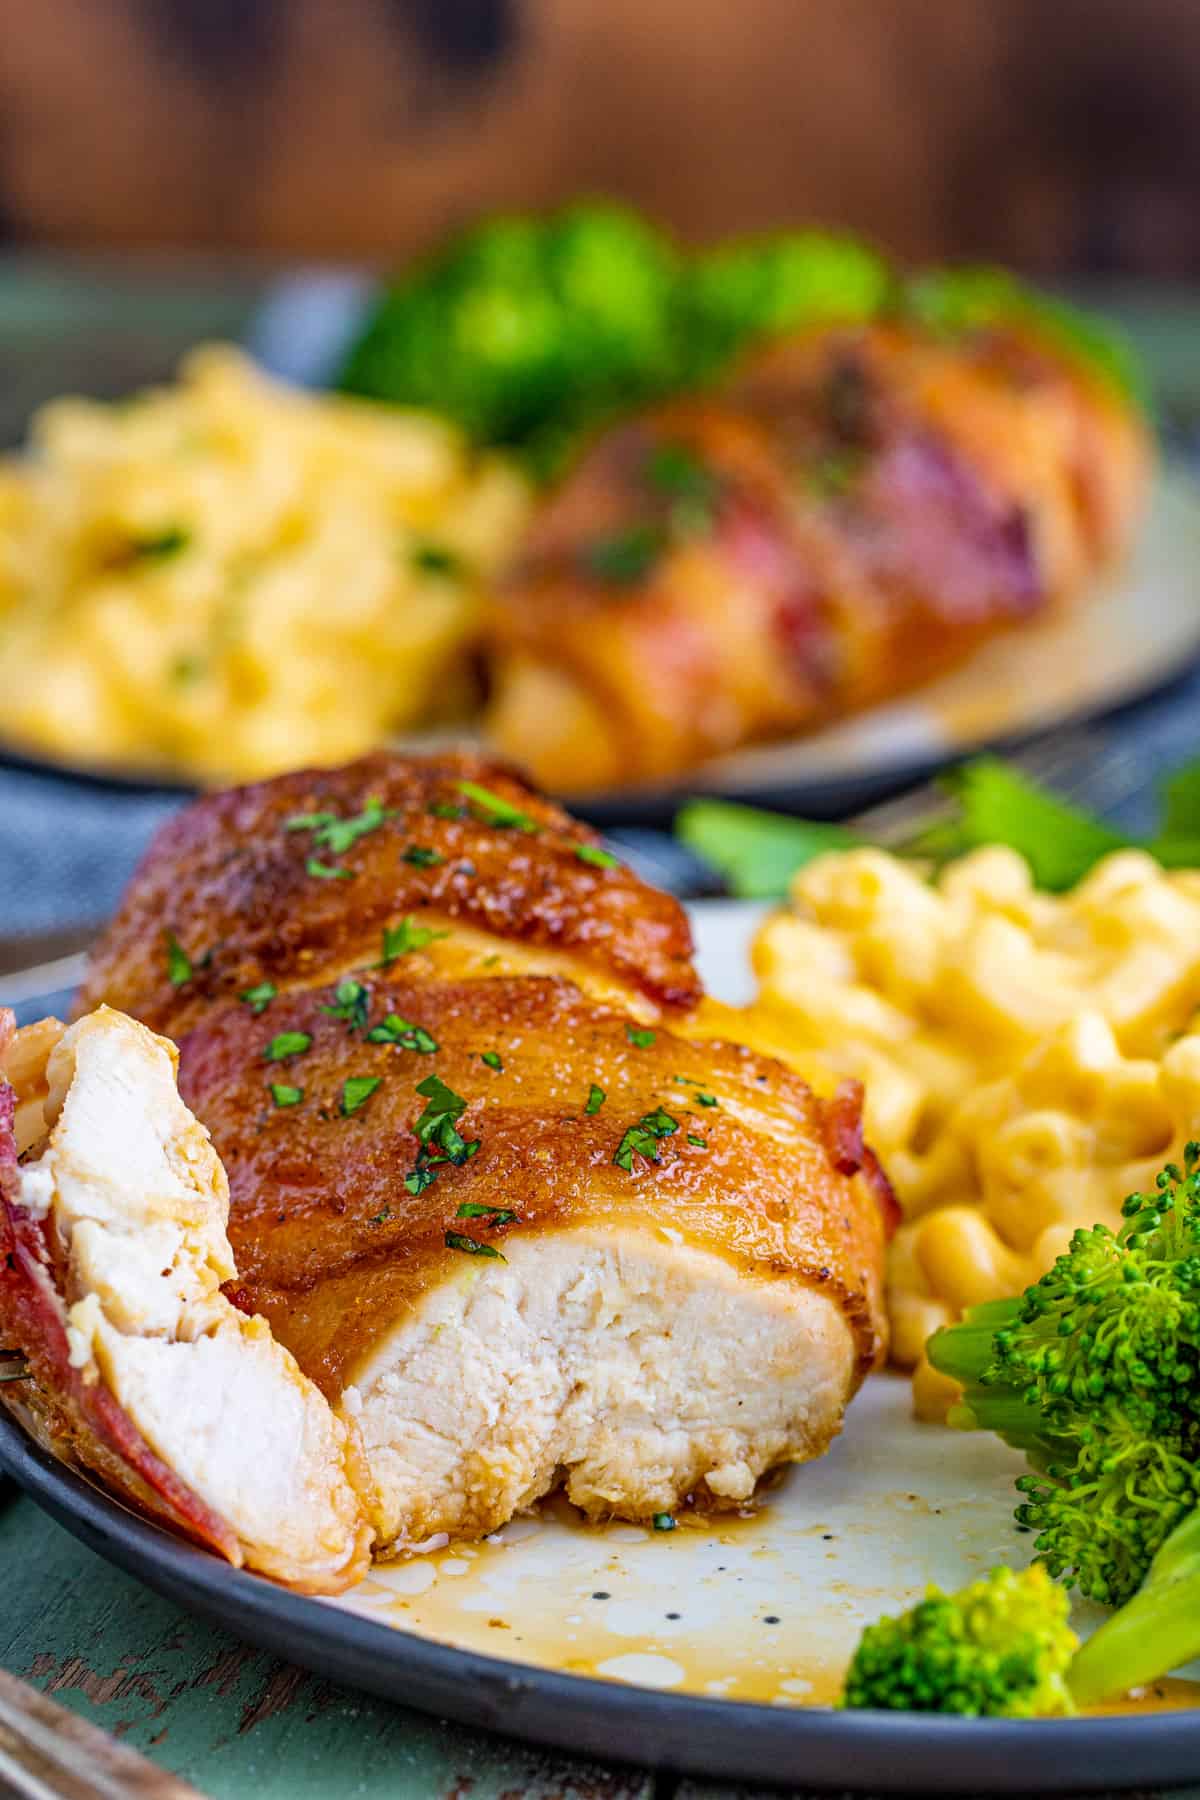 One piece of chicken on plate with a slice cut out showing the inside with mac and cheese and broccoli beside it.